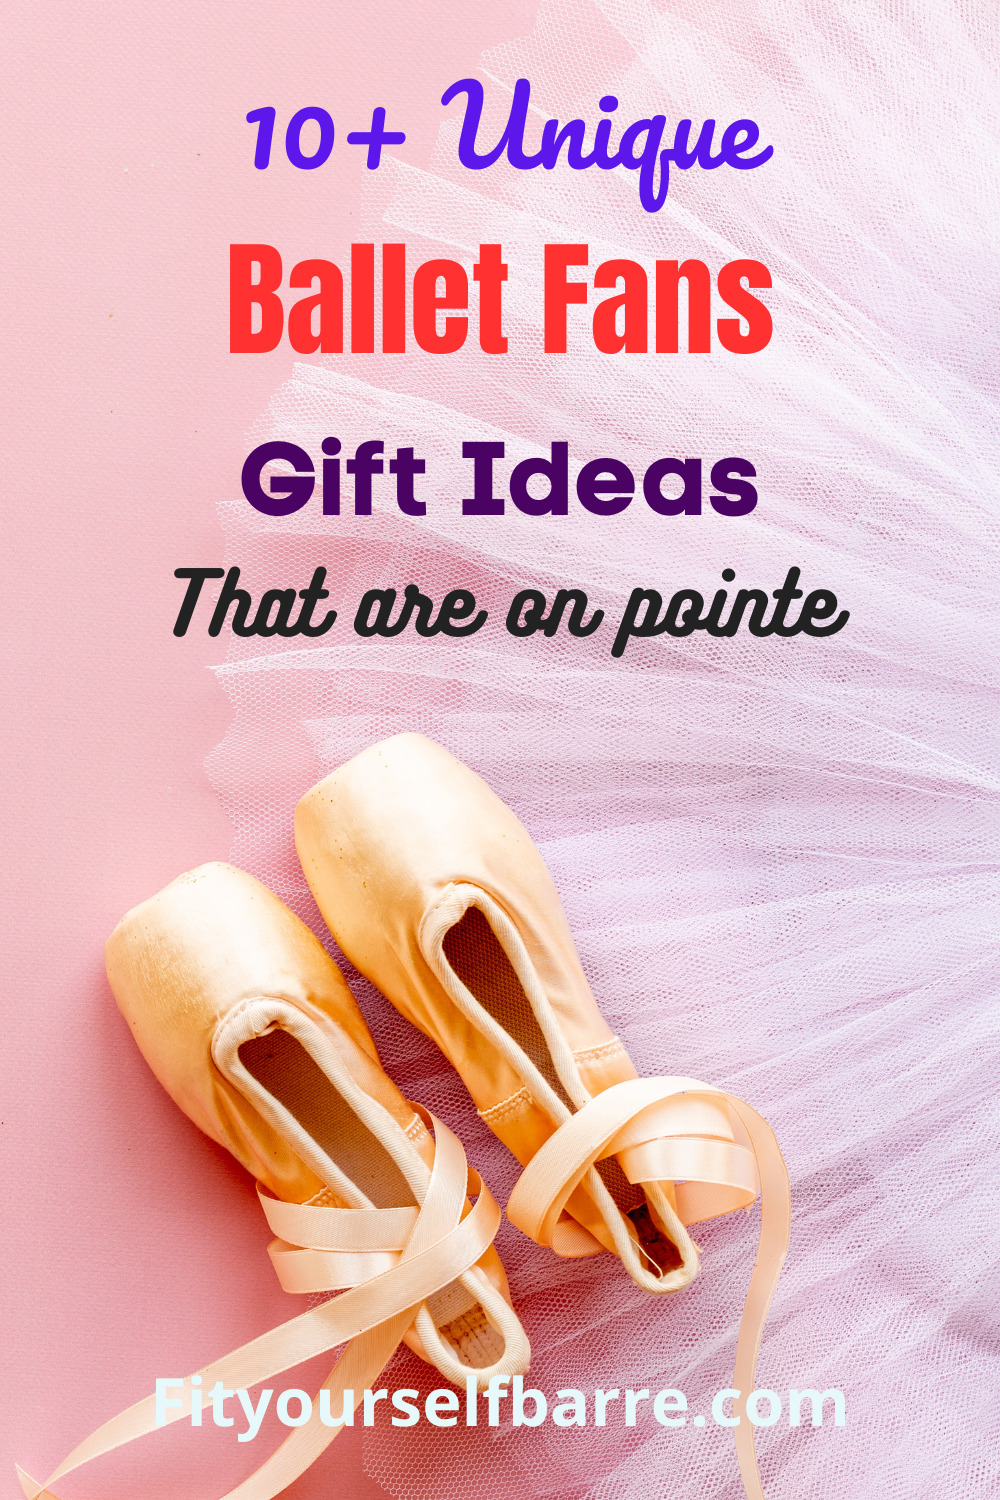 ballet fans gift ideas-Ballet skirt and pointe shoes for ballerina on pink background